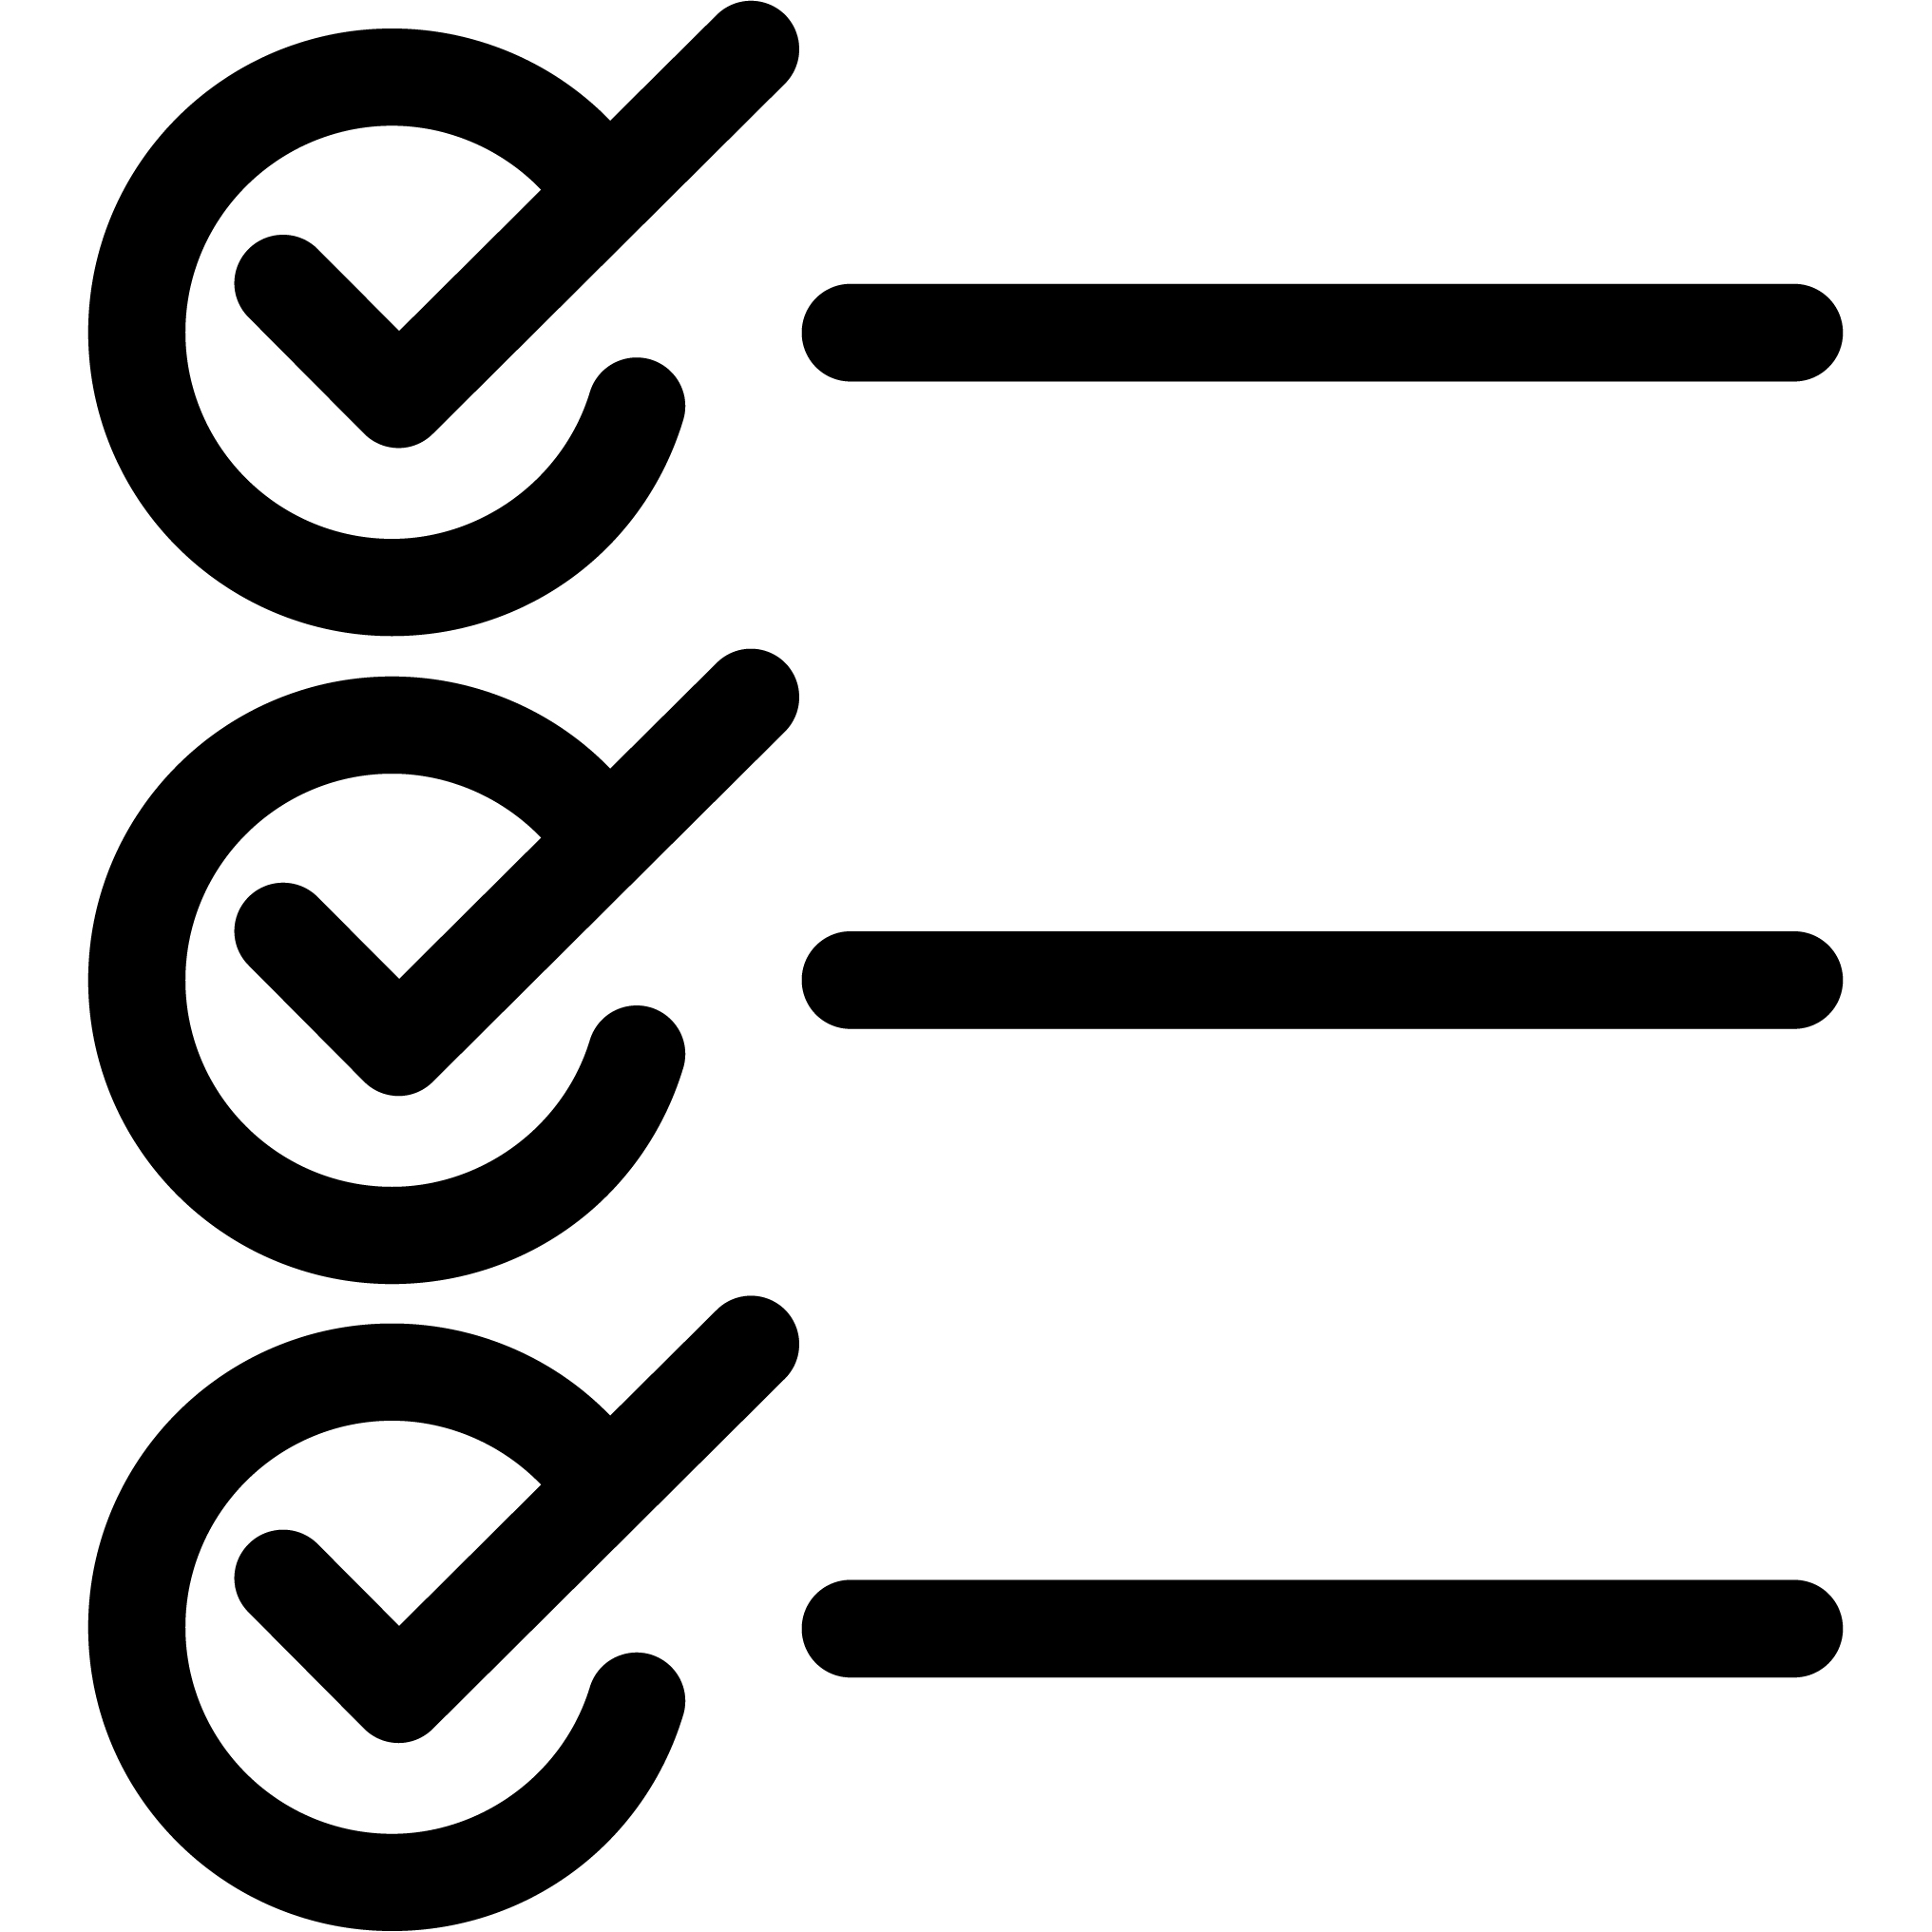 icon of a listing of tasks being checked off